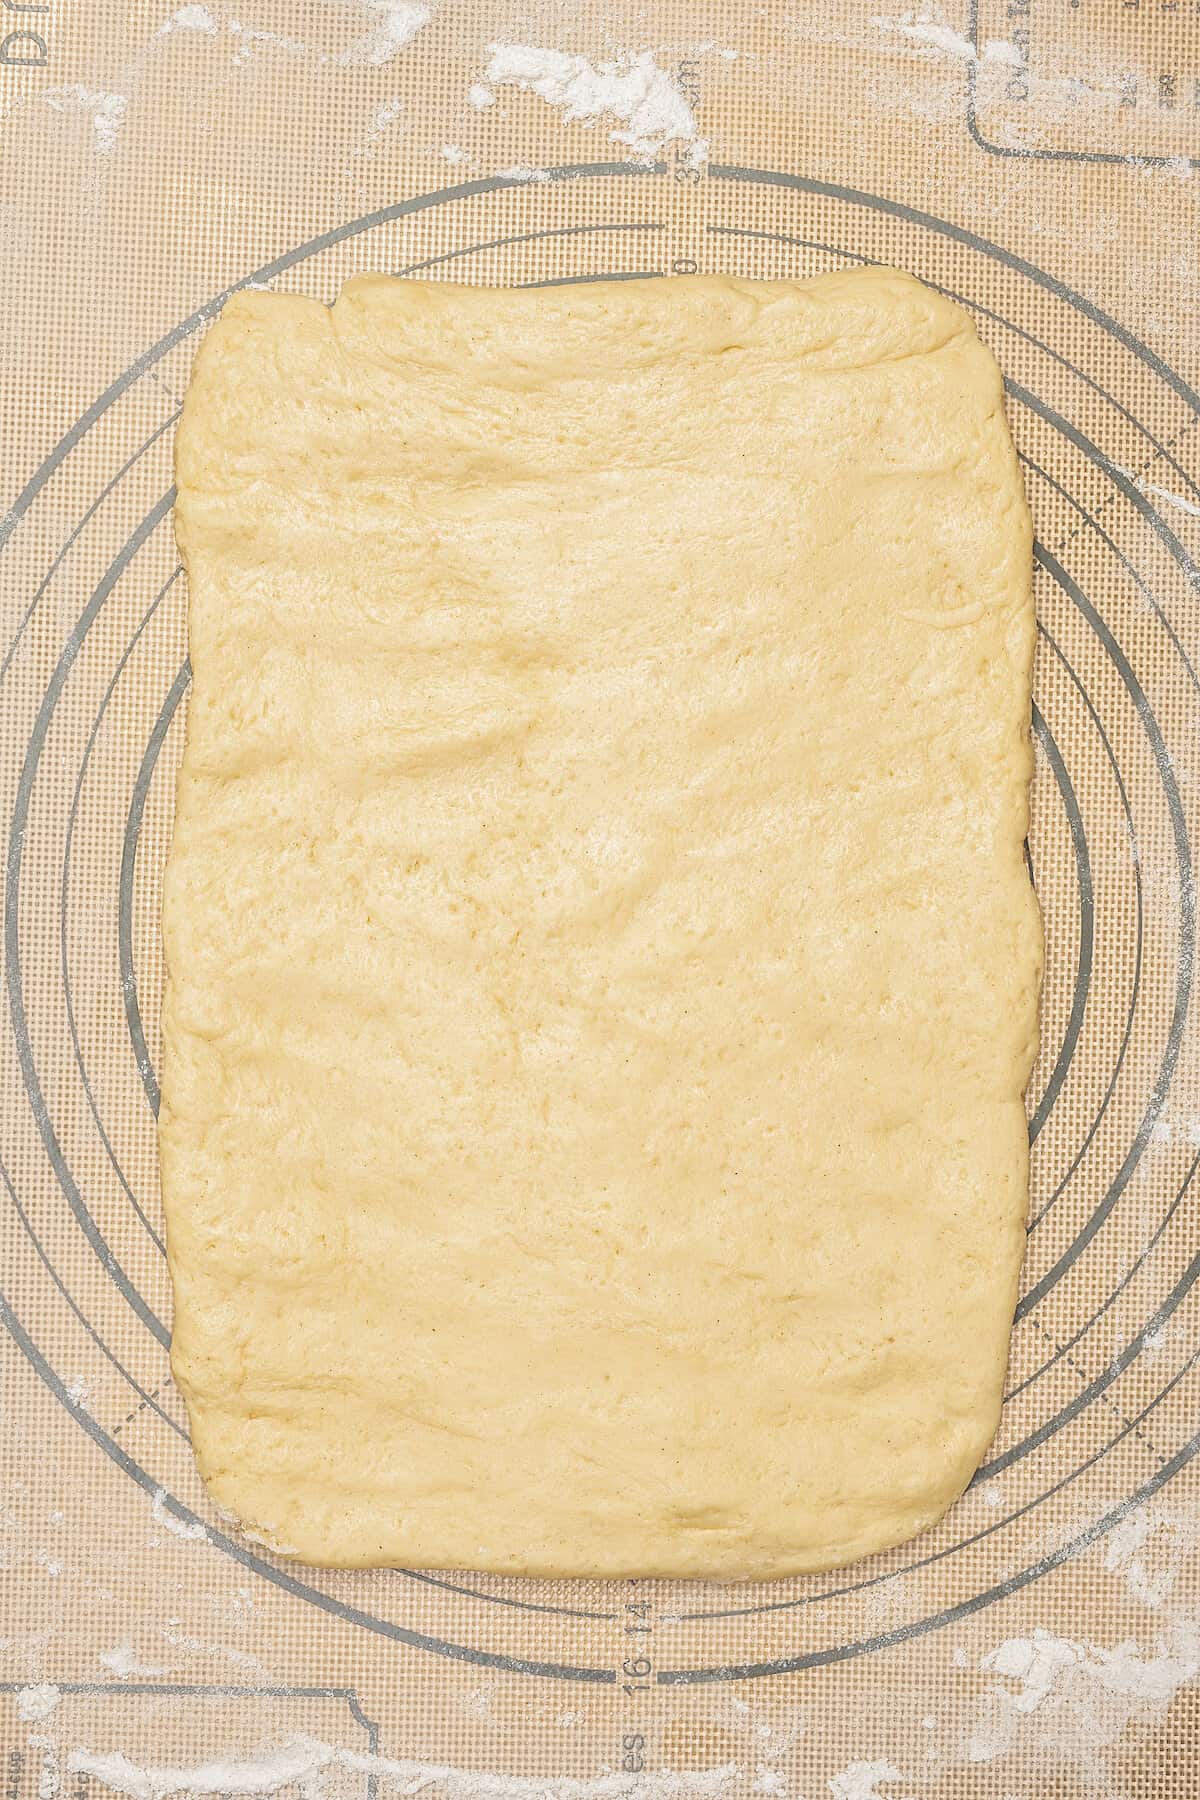 Gluten-free honey bun dough rolled out into a large rectangle.